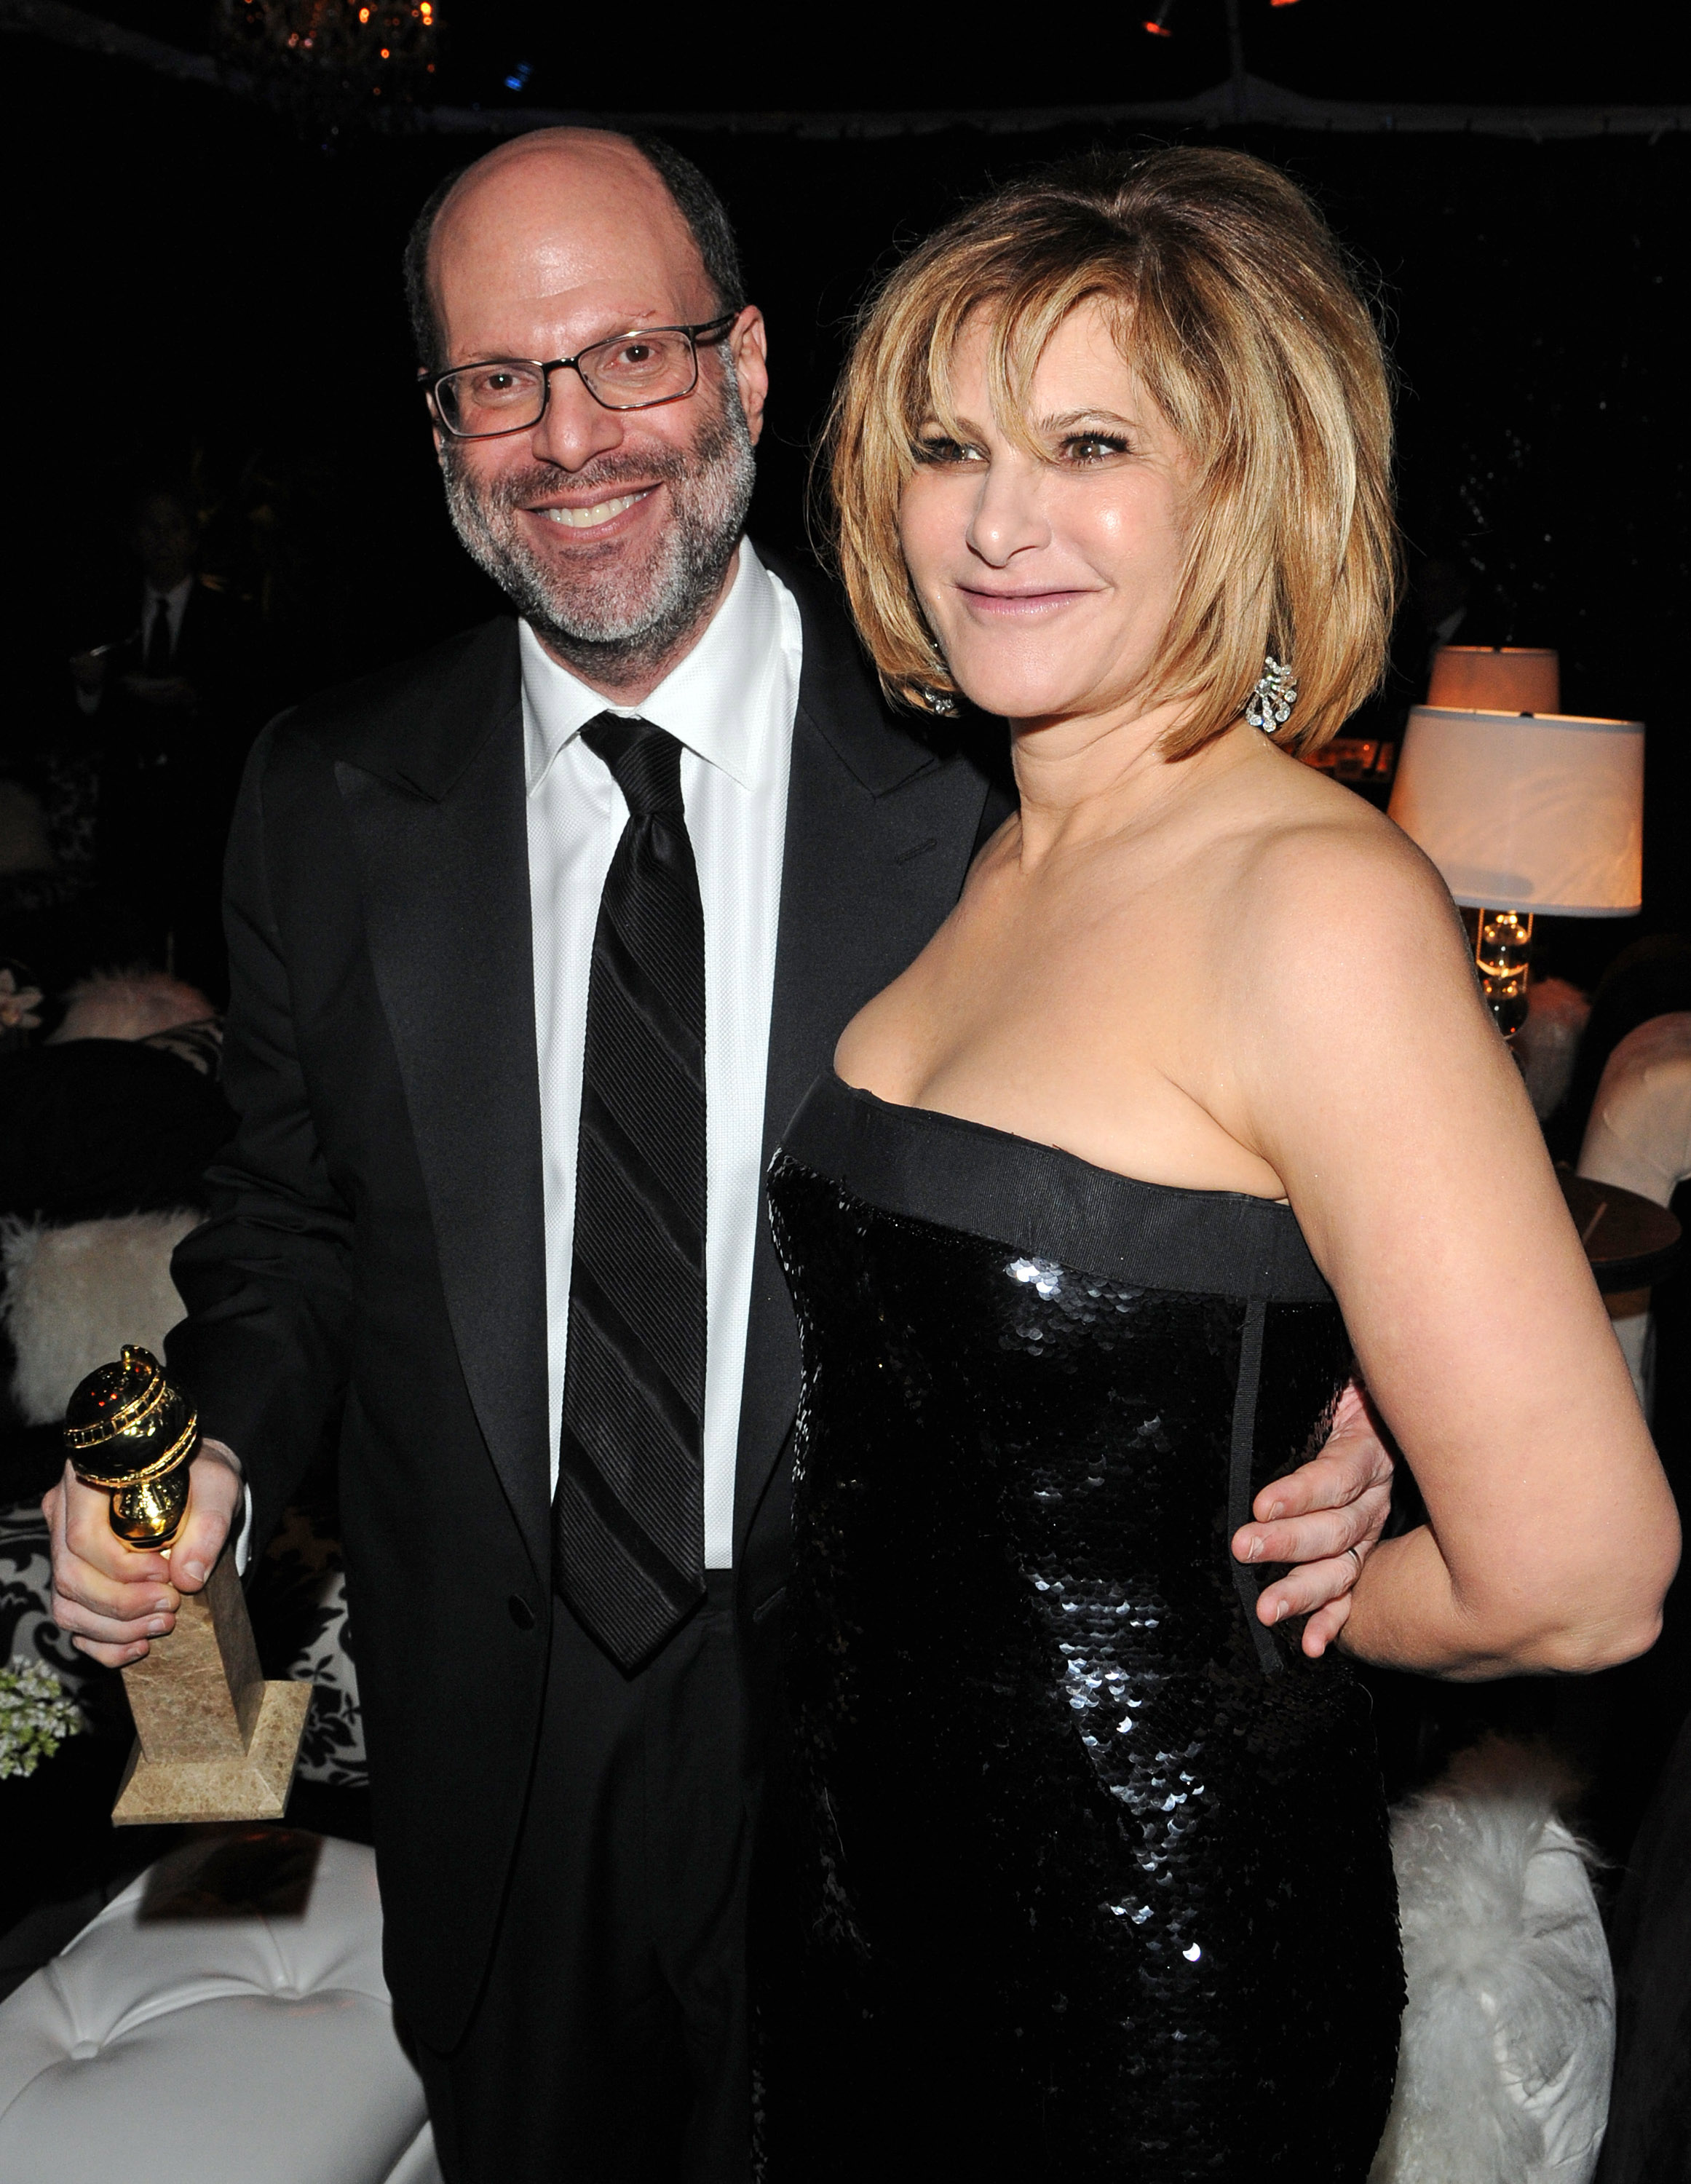 Scott Rudin and Amy Pascal attend the Sony Pictures Classic 68th Annual Golden Globe Awards Party held at The Beverly Hilton hotel on January 16, 2011 in Beverly Hills, California. (Jean Baptiste Lacroix&mdash;WireImage)